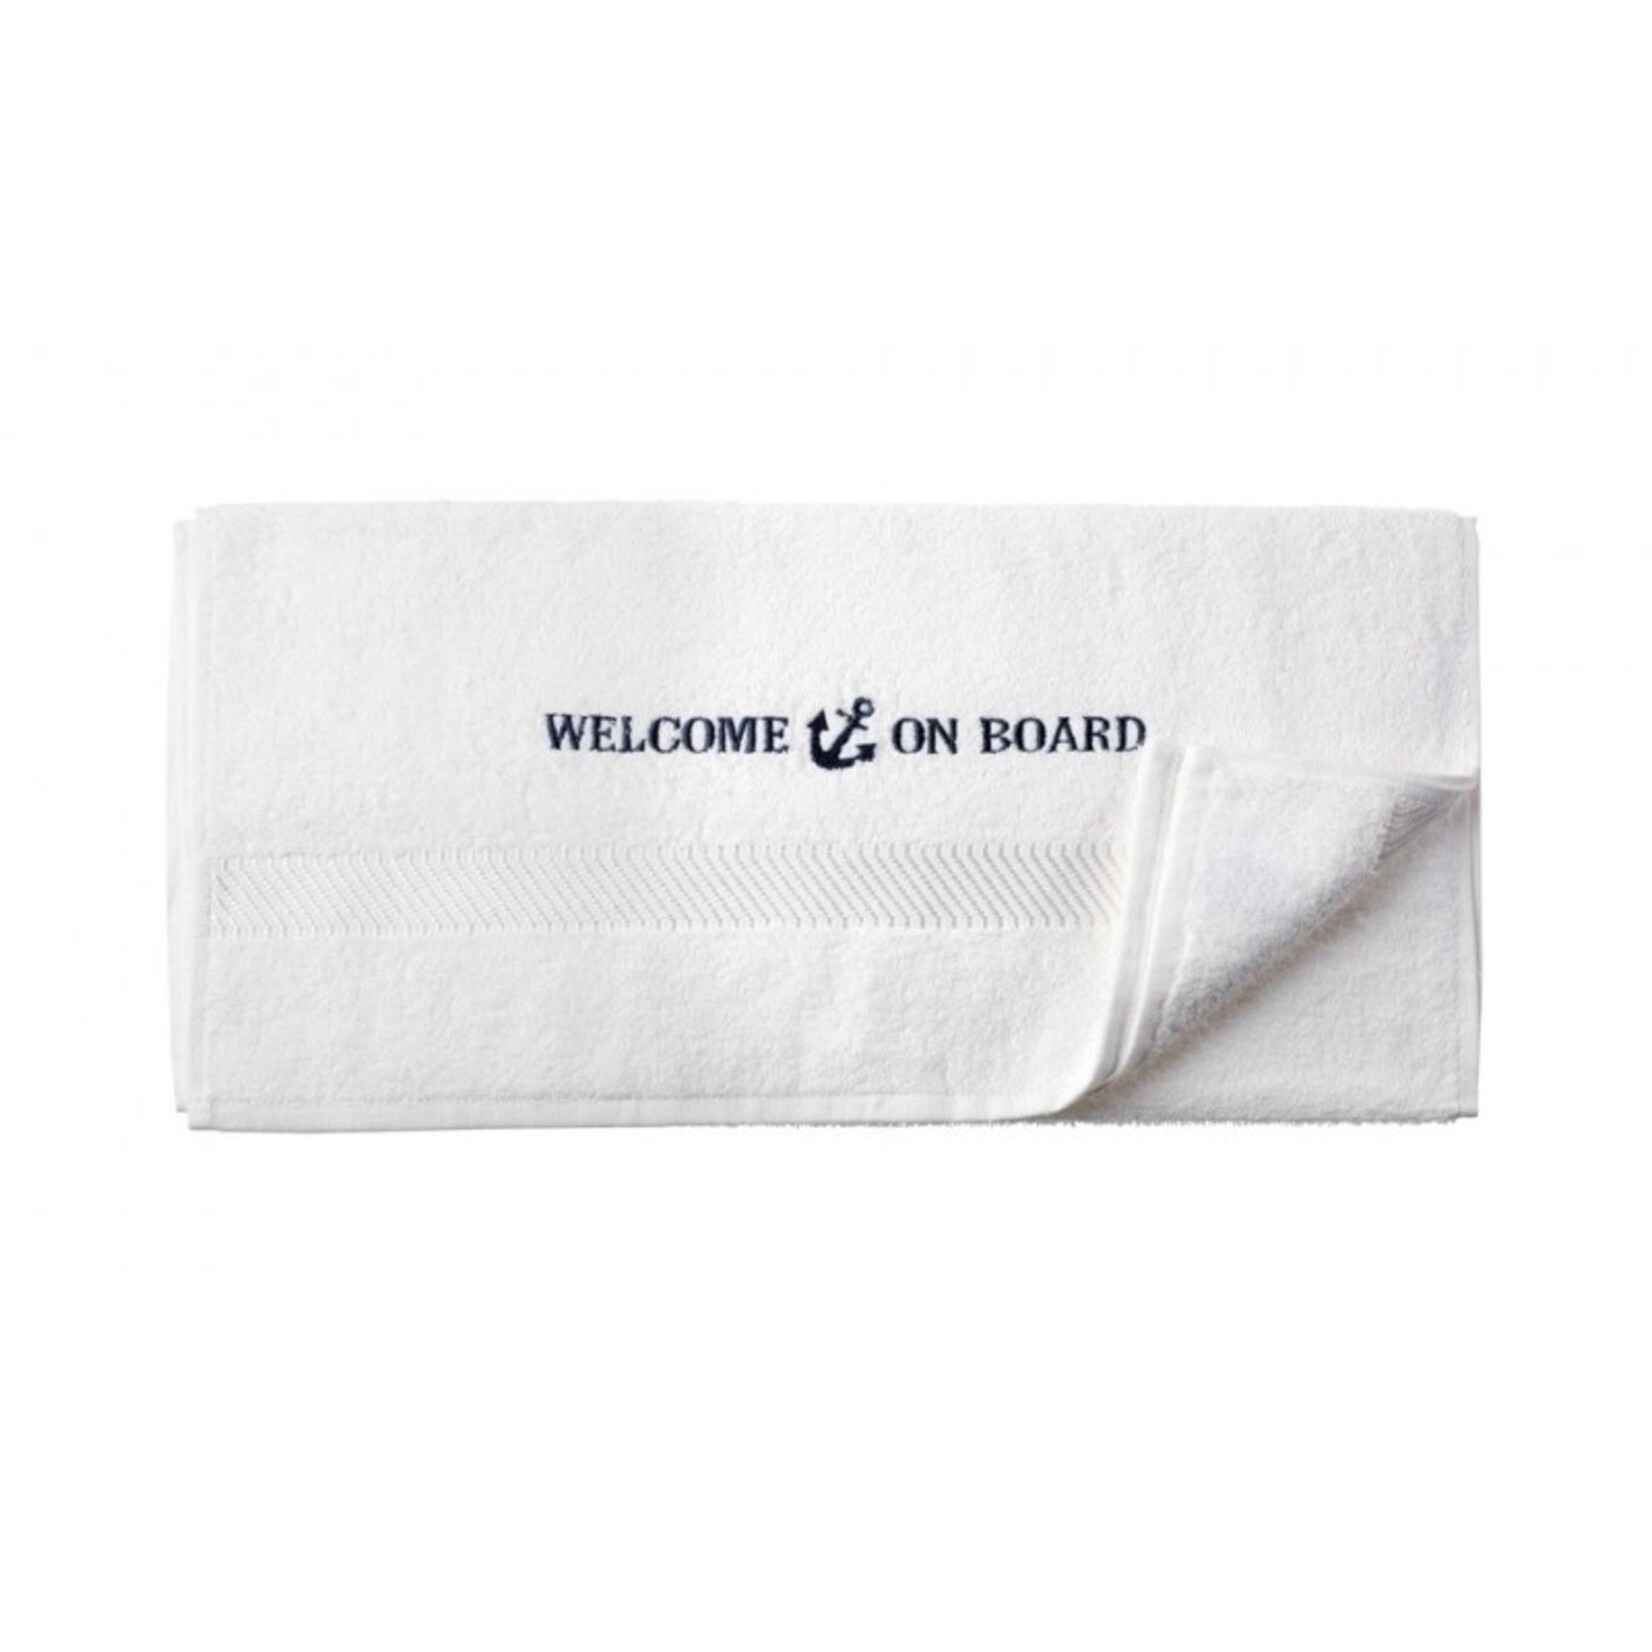 Towel Welcome on board embroidered 50 x 100 cm white